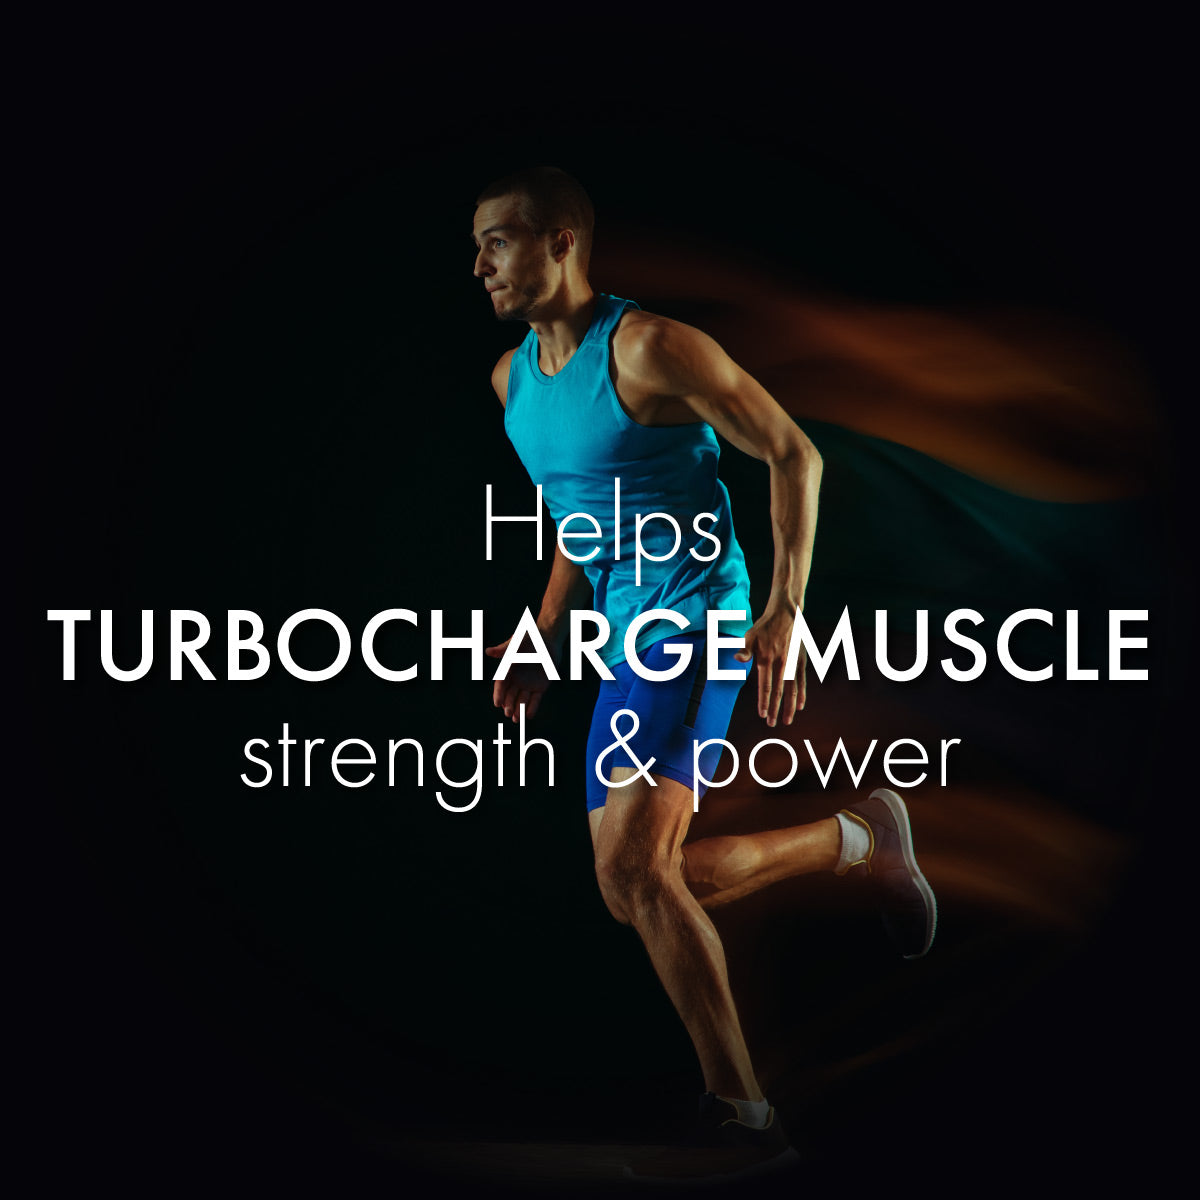 Herbo24Turbo Stamina Booster Combo: For Turbocharged Power & Stamina